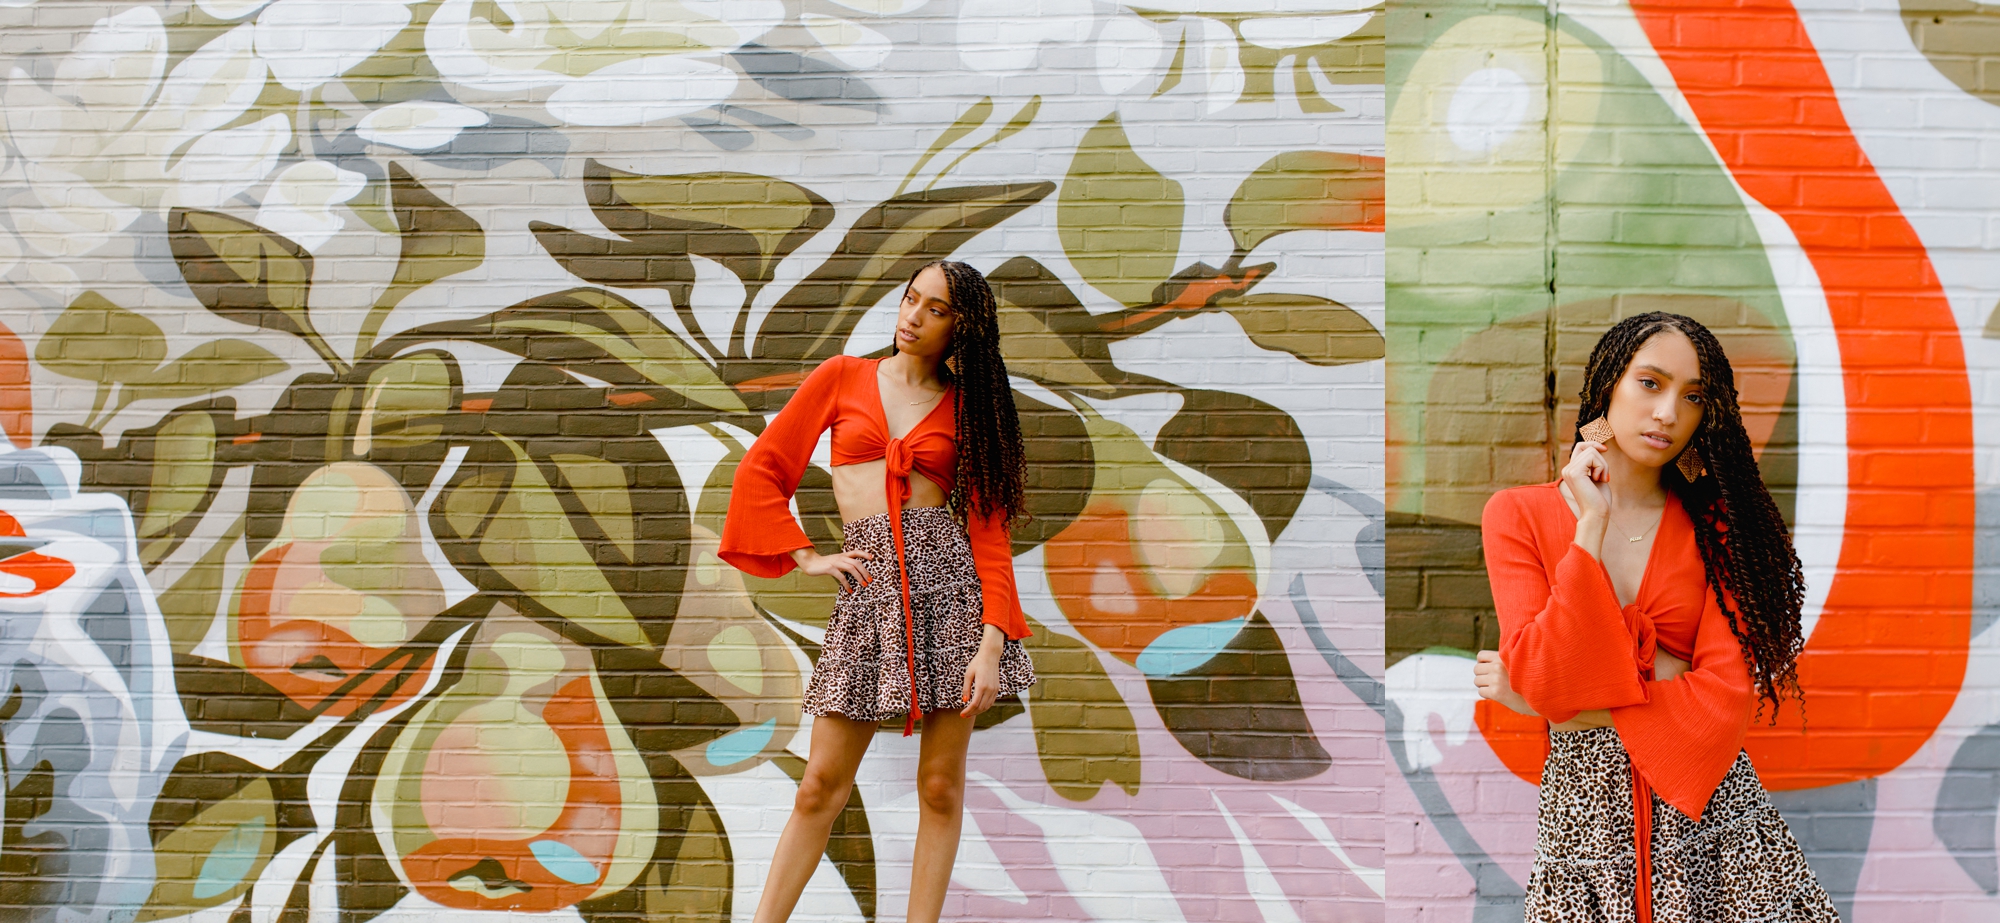 Alize poses in a red crop top and cheetah skirt in front of a mural in York.